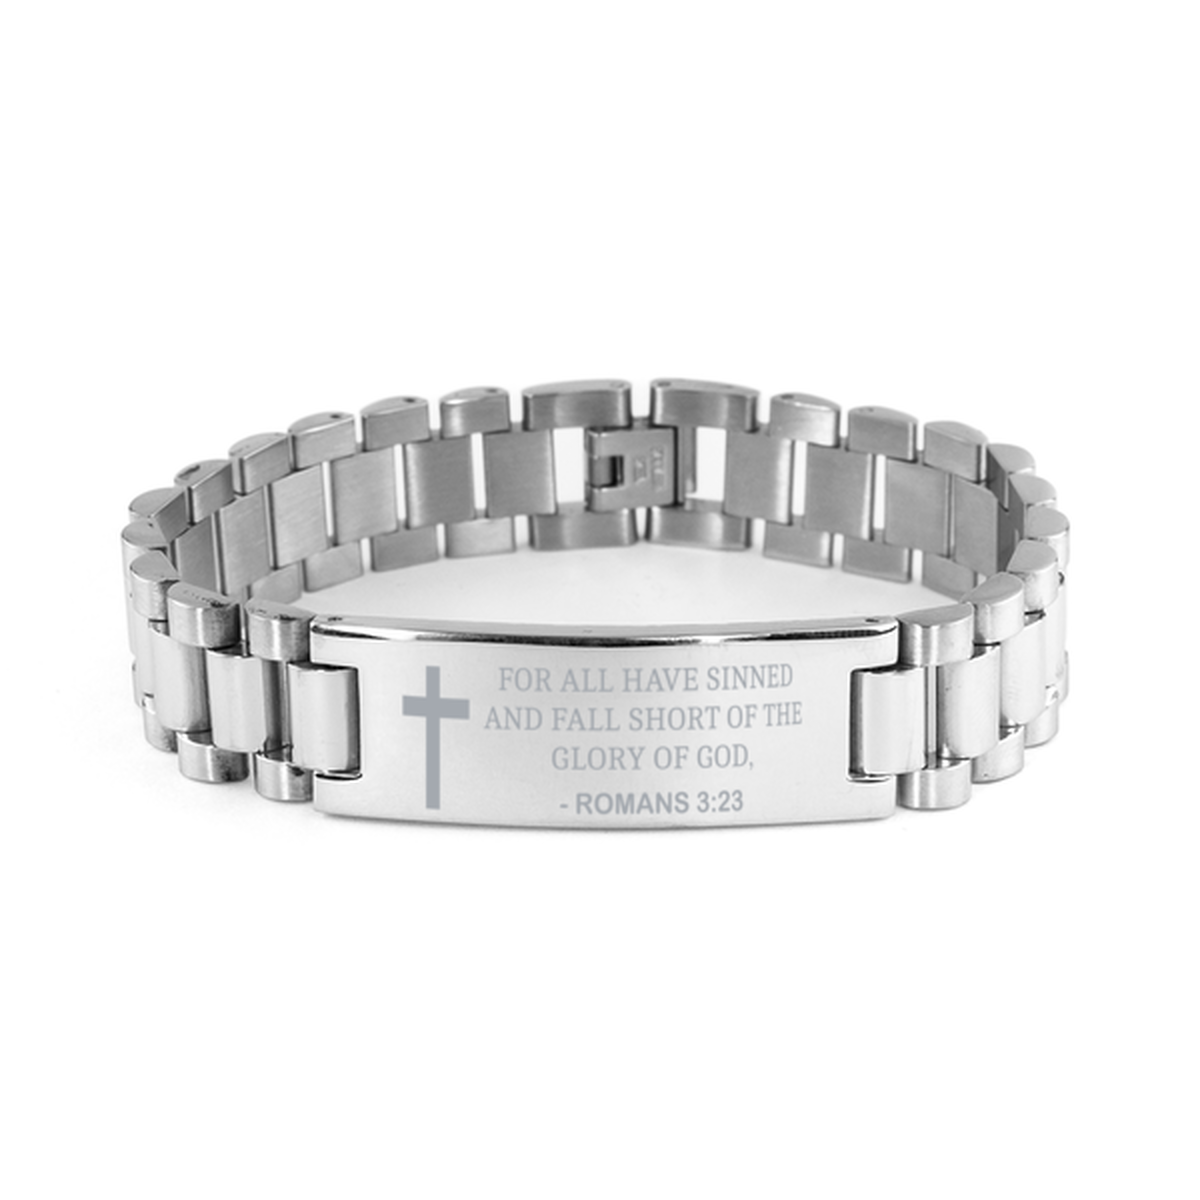 Christian Ladder Stainless Steel Bracelet, Romans 3:23 For All Have Sinned And Fall Short Of The Glory, Motivational Bible Verse Gifts For Men Women